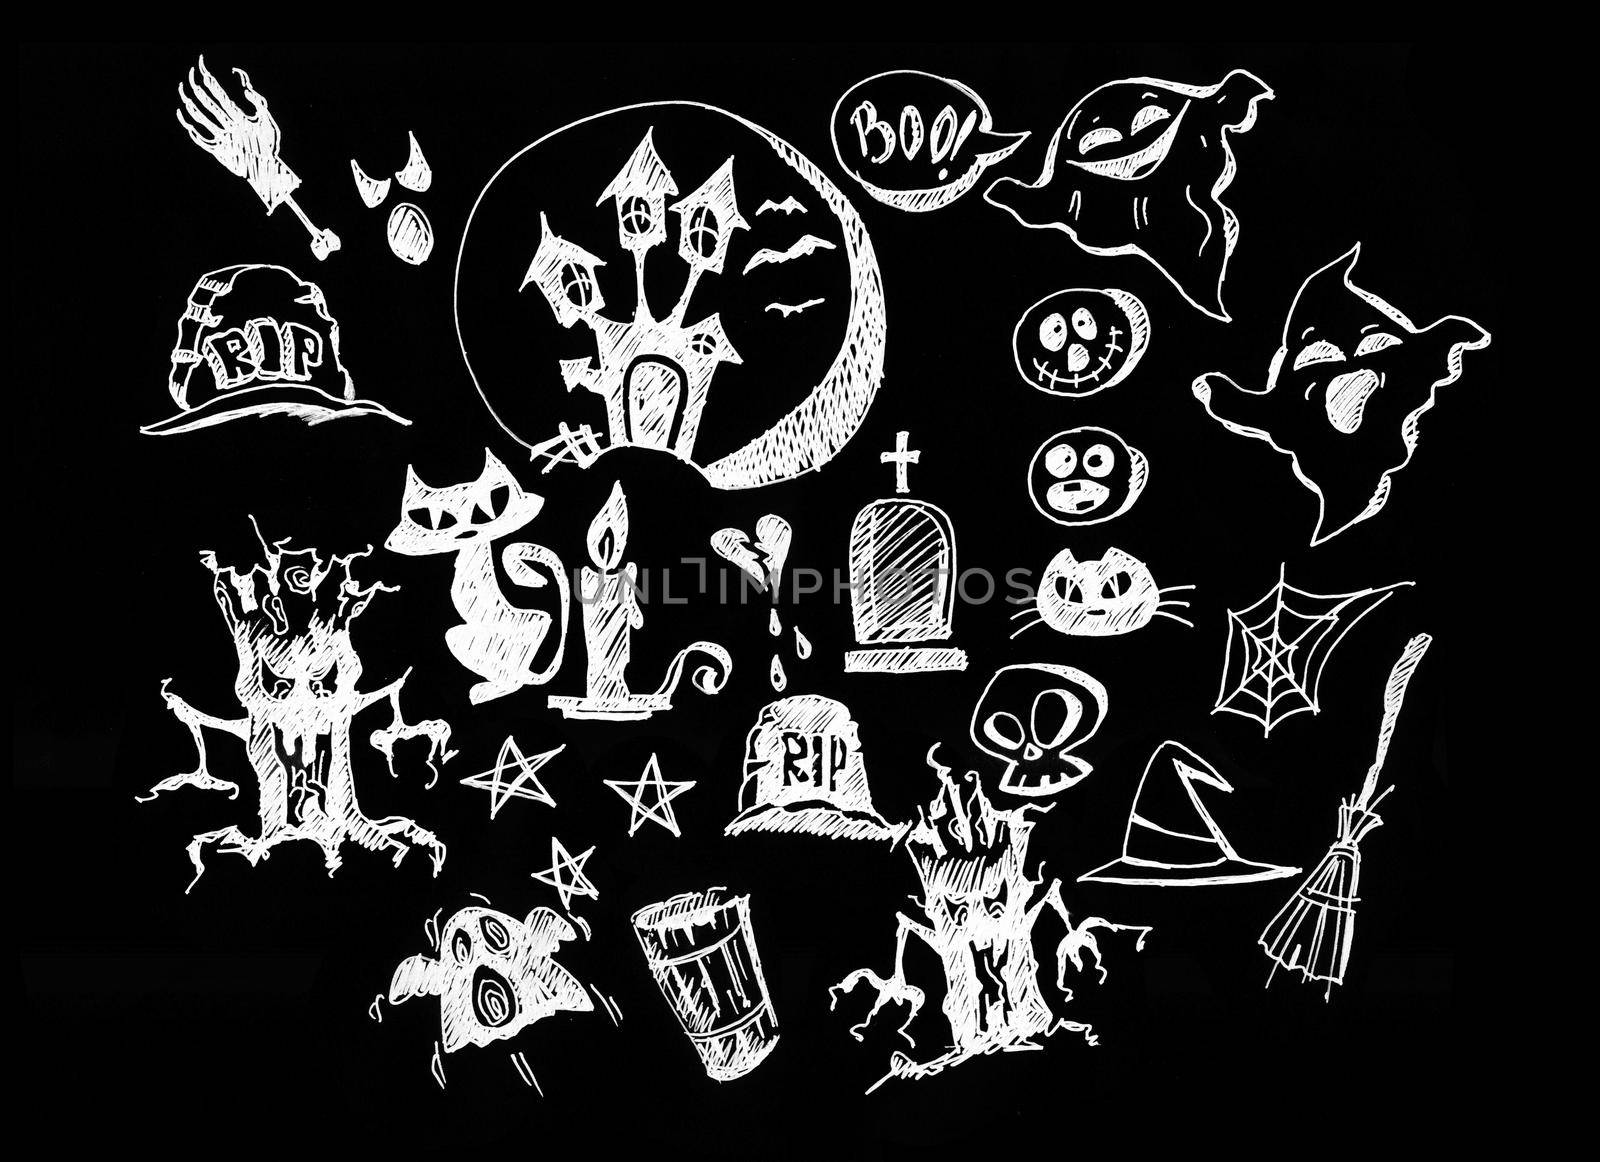 Scary and funny collection of Halloween illustrations by Taut